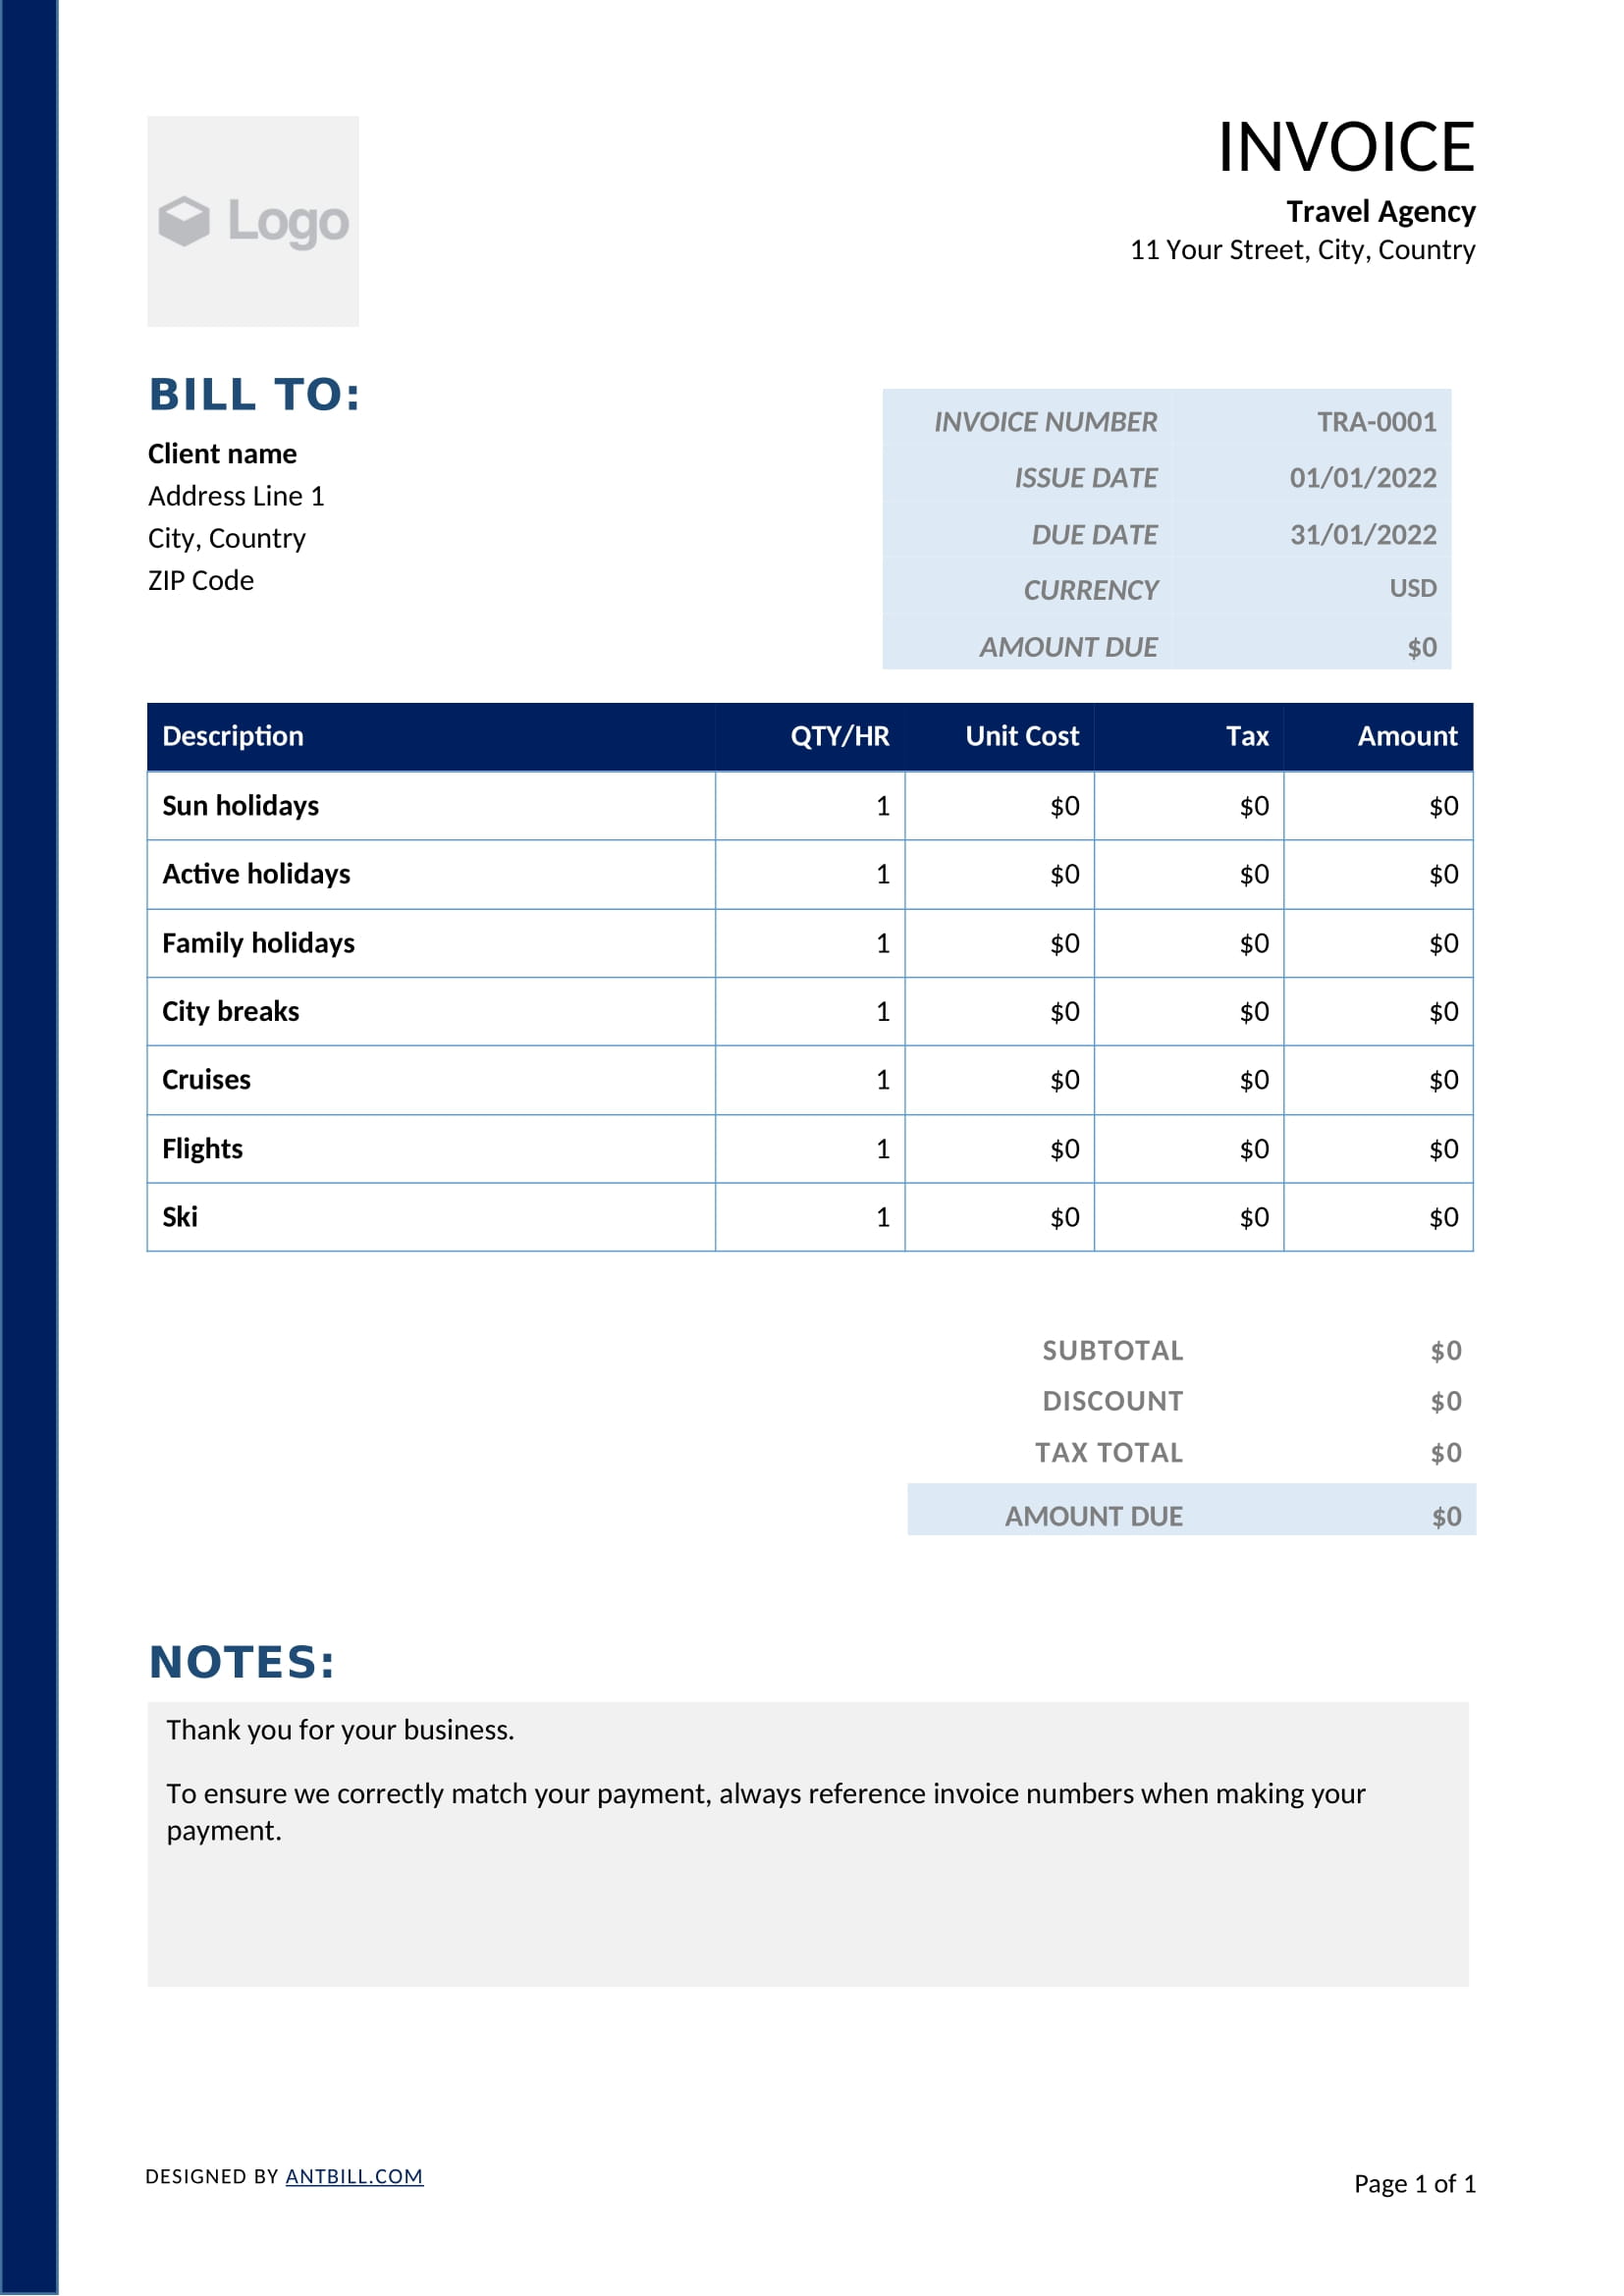 Travel Agency Invoice Template - professional